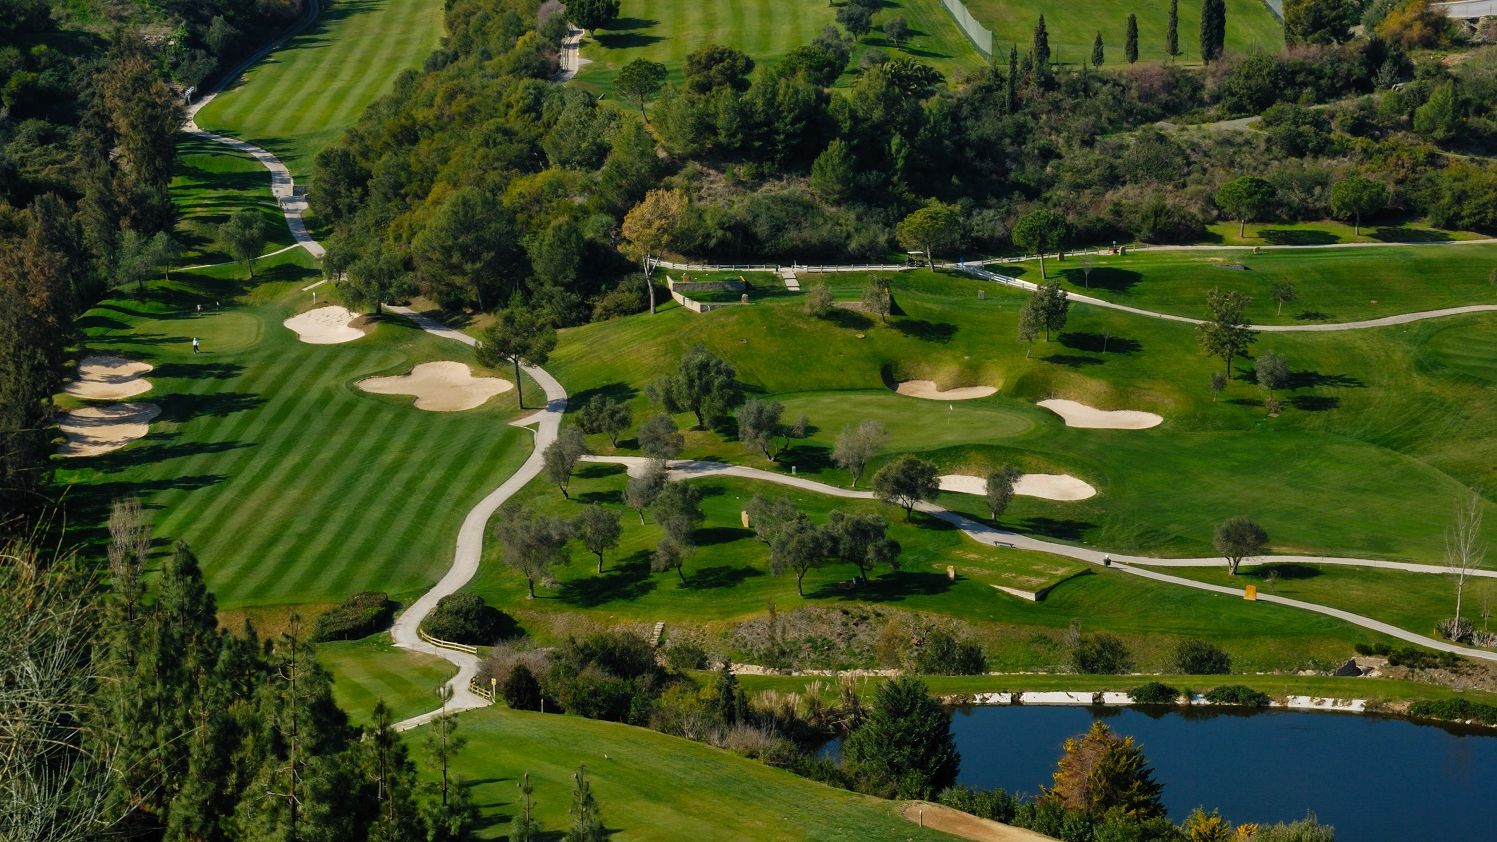 Where to play golf in Marbella?